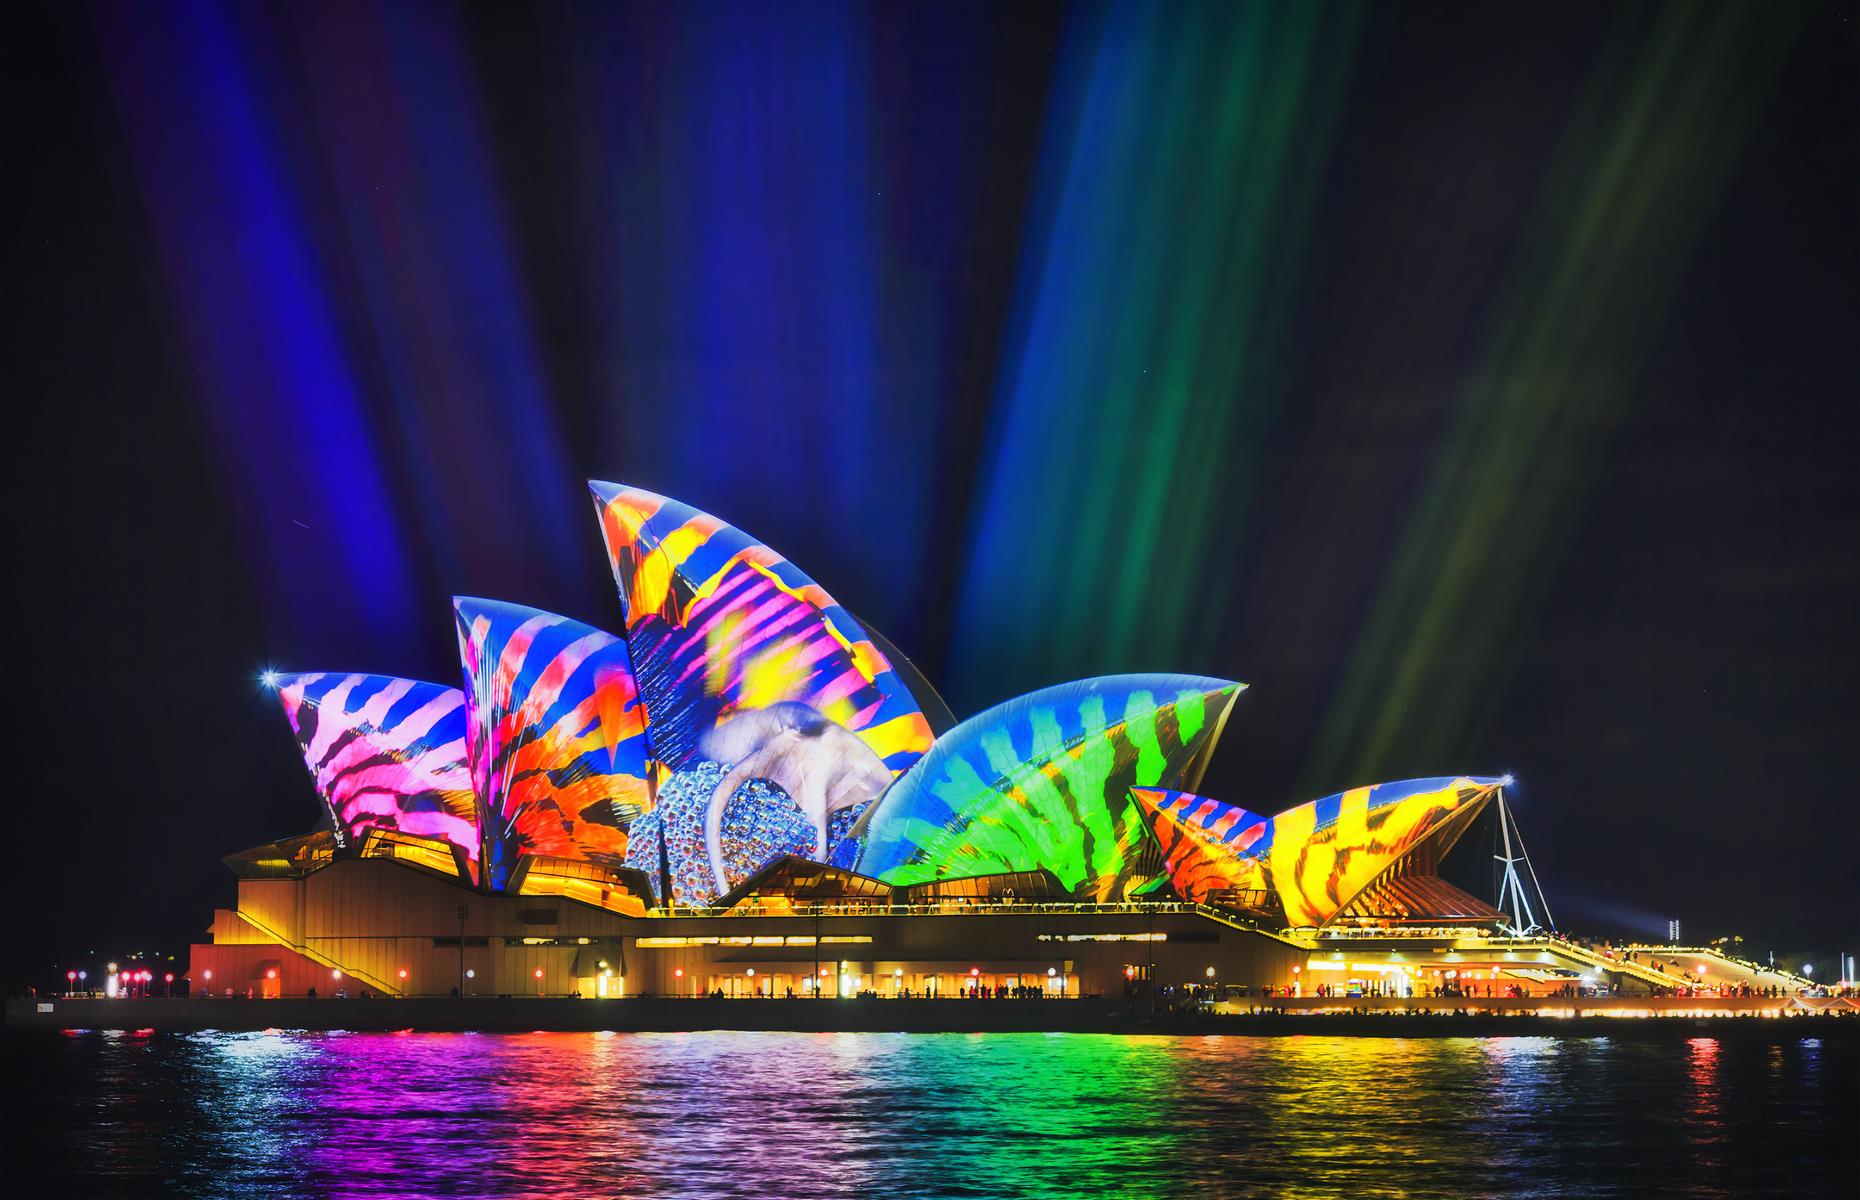 <p>Sydney is a stunner all year round, but visit the city in May and June and you’ll be in for an extra sensory treat. Each year, the city’s iconic buildings become a canvas for <a href="https://www.vividsydney.com/">Vivid Sydney</a> – a festival of light and music. Venture into the Central Business District from 6pm-11pm and watch dazzling light installations and projections illuminate historic sights including the Sydney Opera House, Customs House and Taronga Zoo Sydney. There are various paid-for music performances and creative events too.  </p>